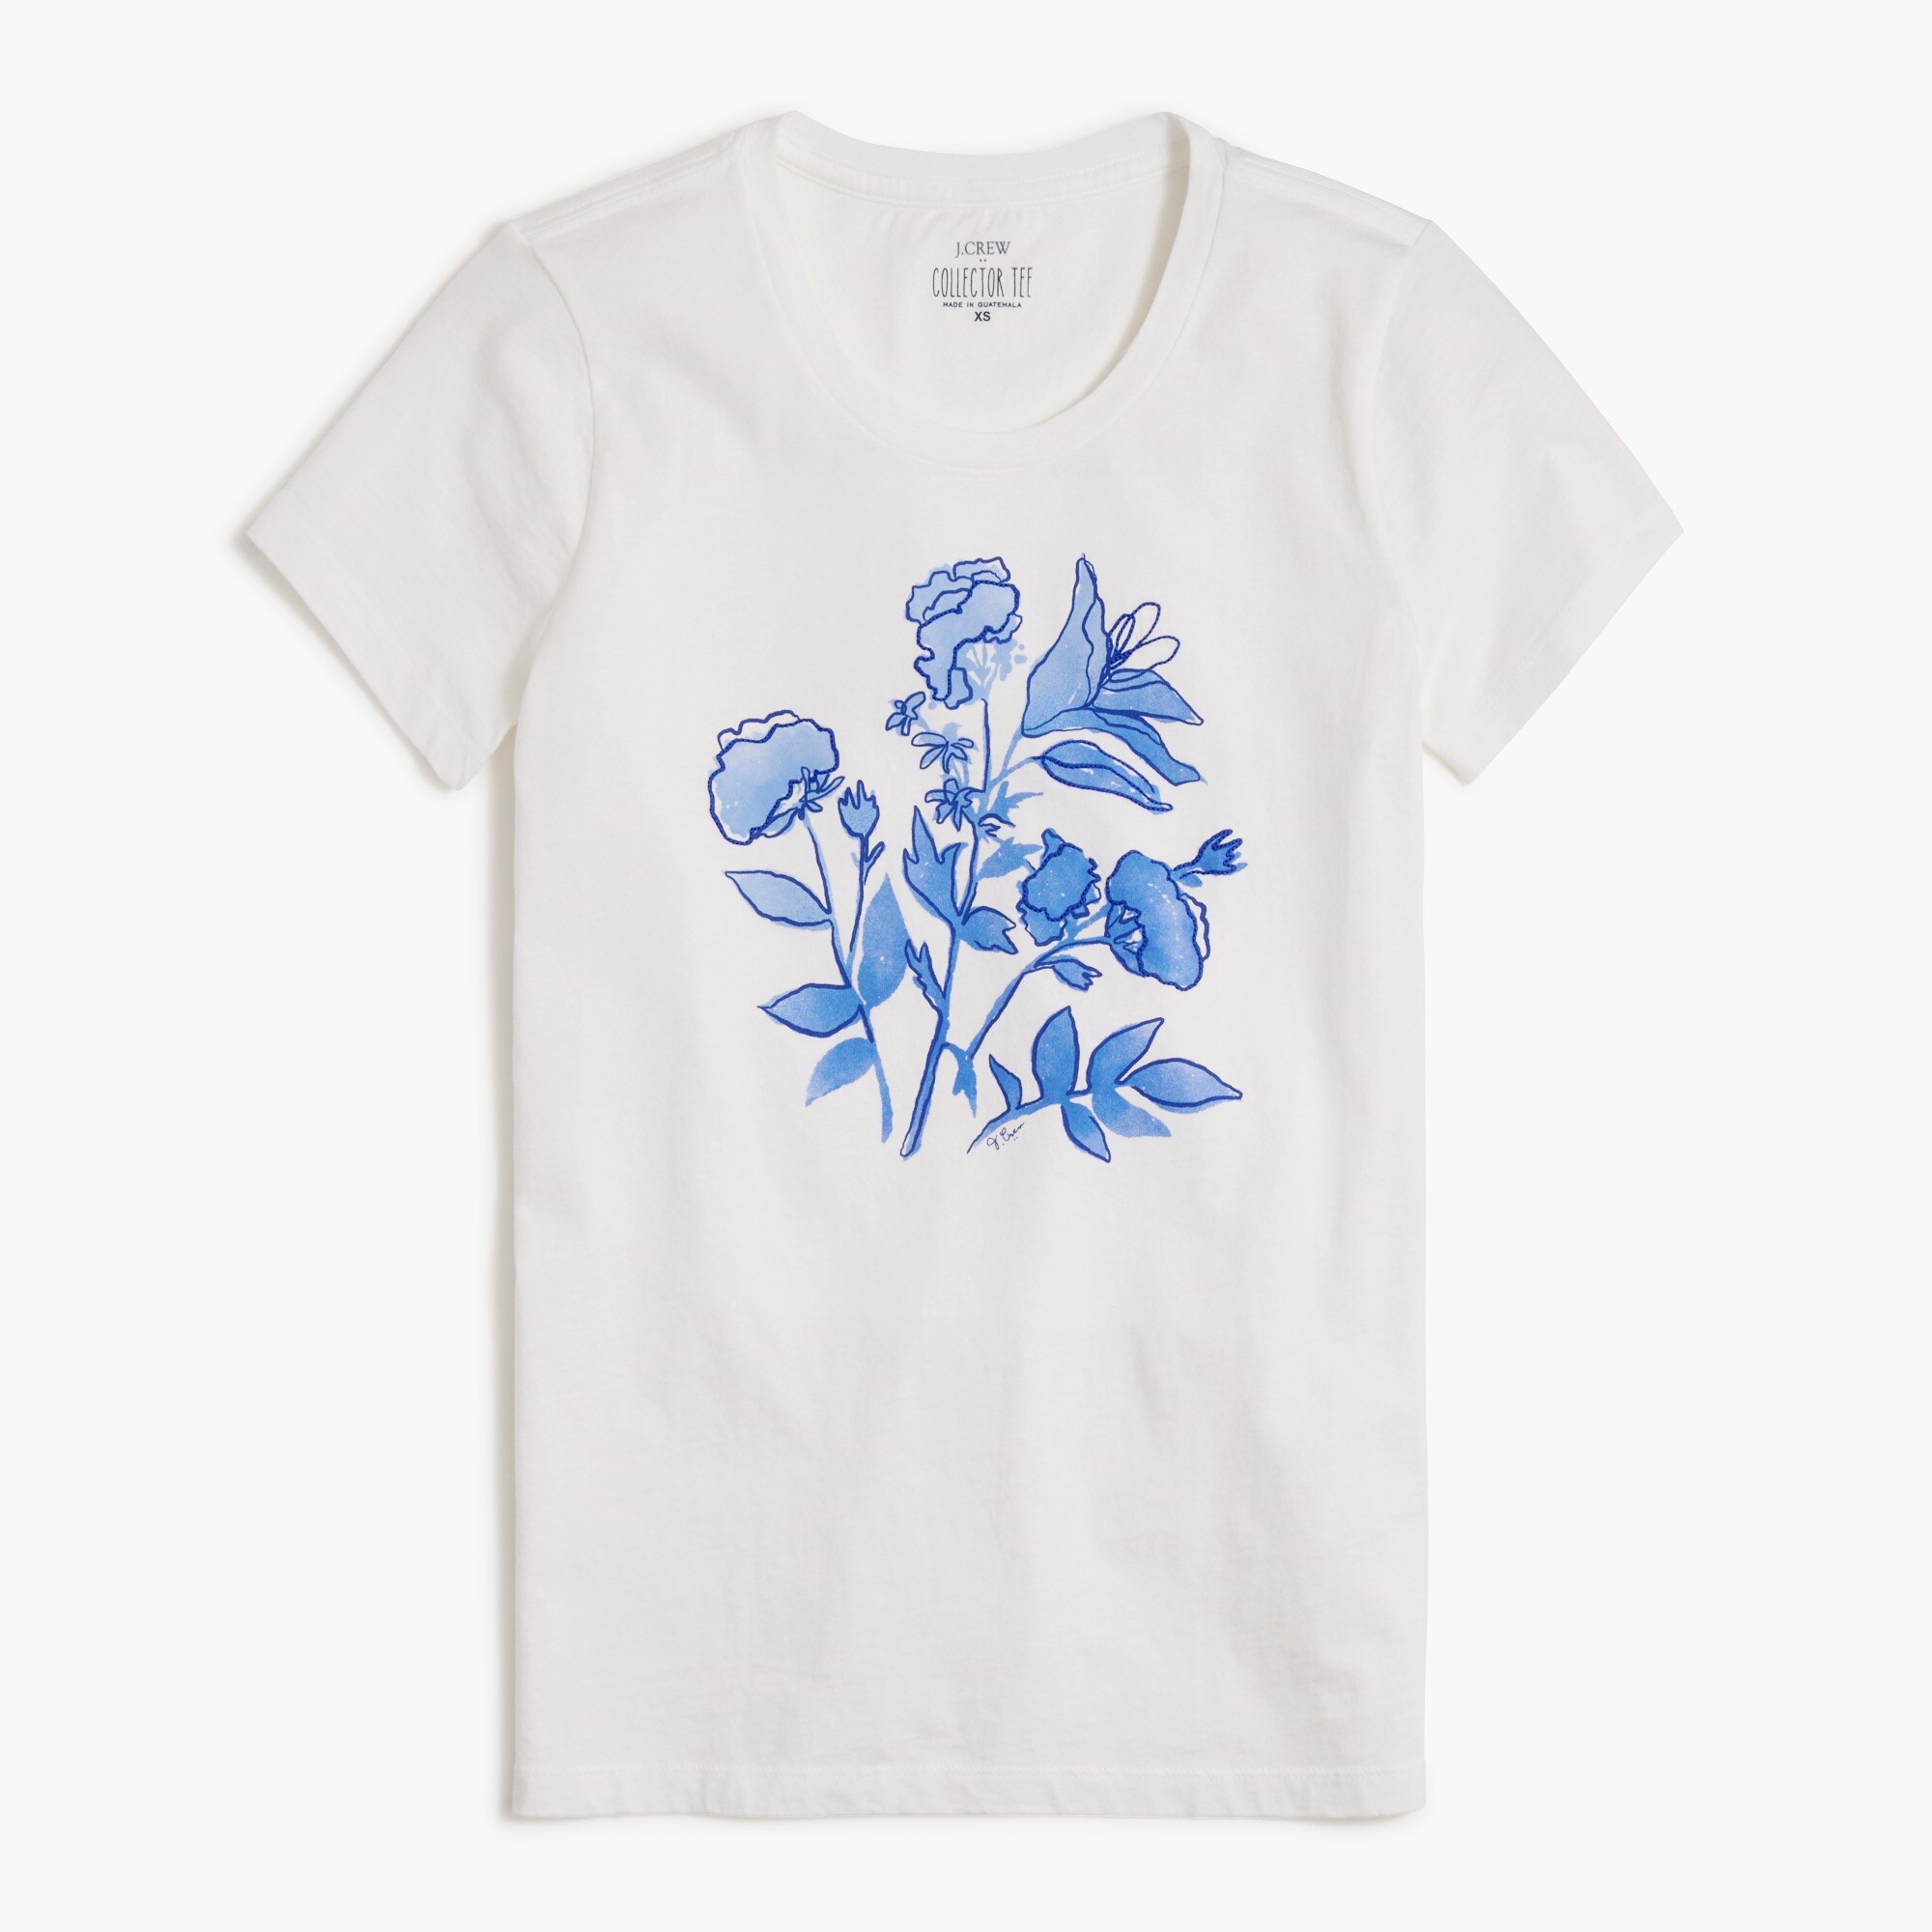  Embroidered flowers graphic tee